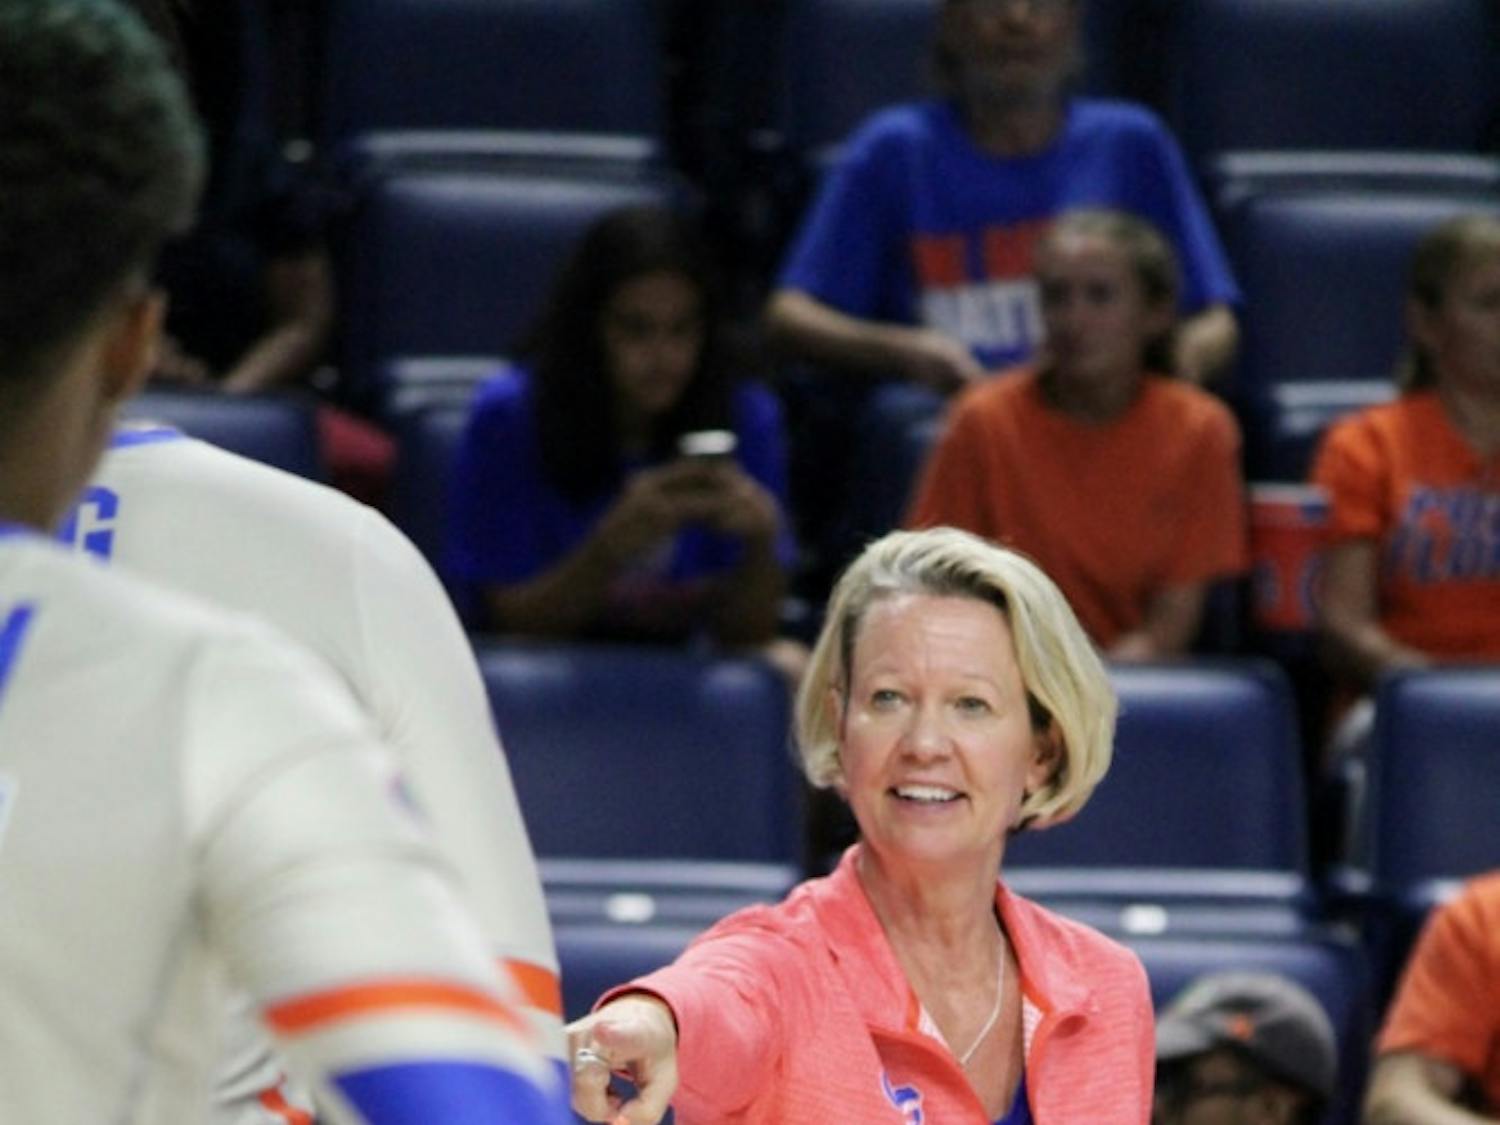 Coach Mary Wise has led her team to a 5-2 season so far in 2019.